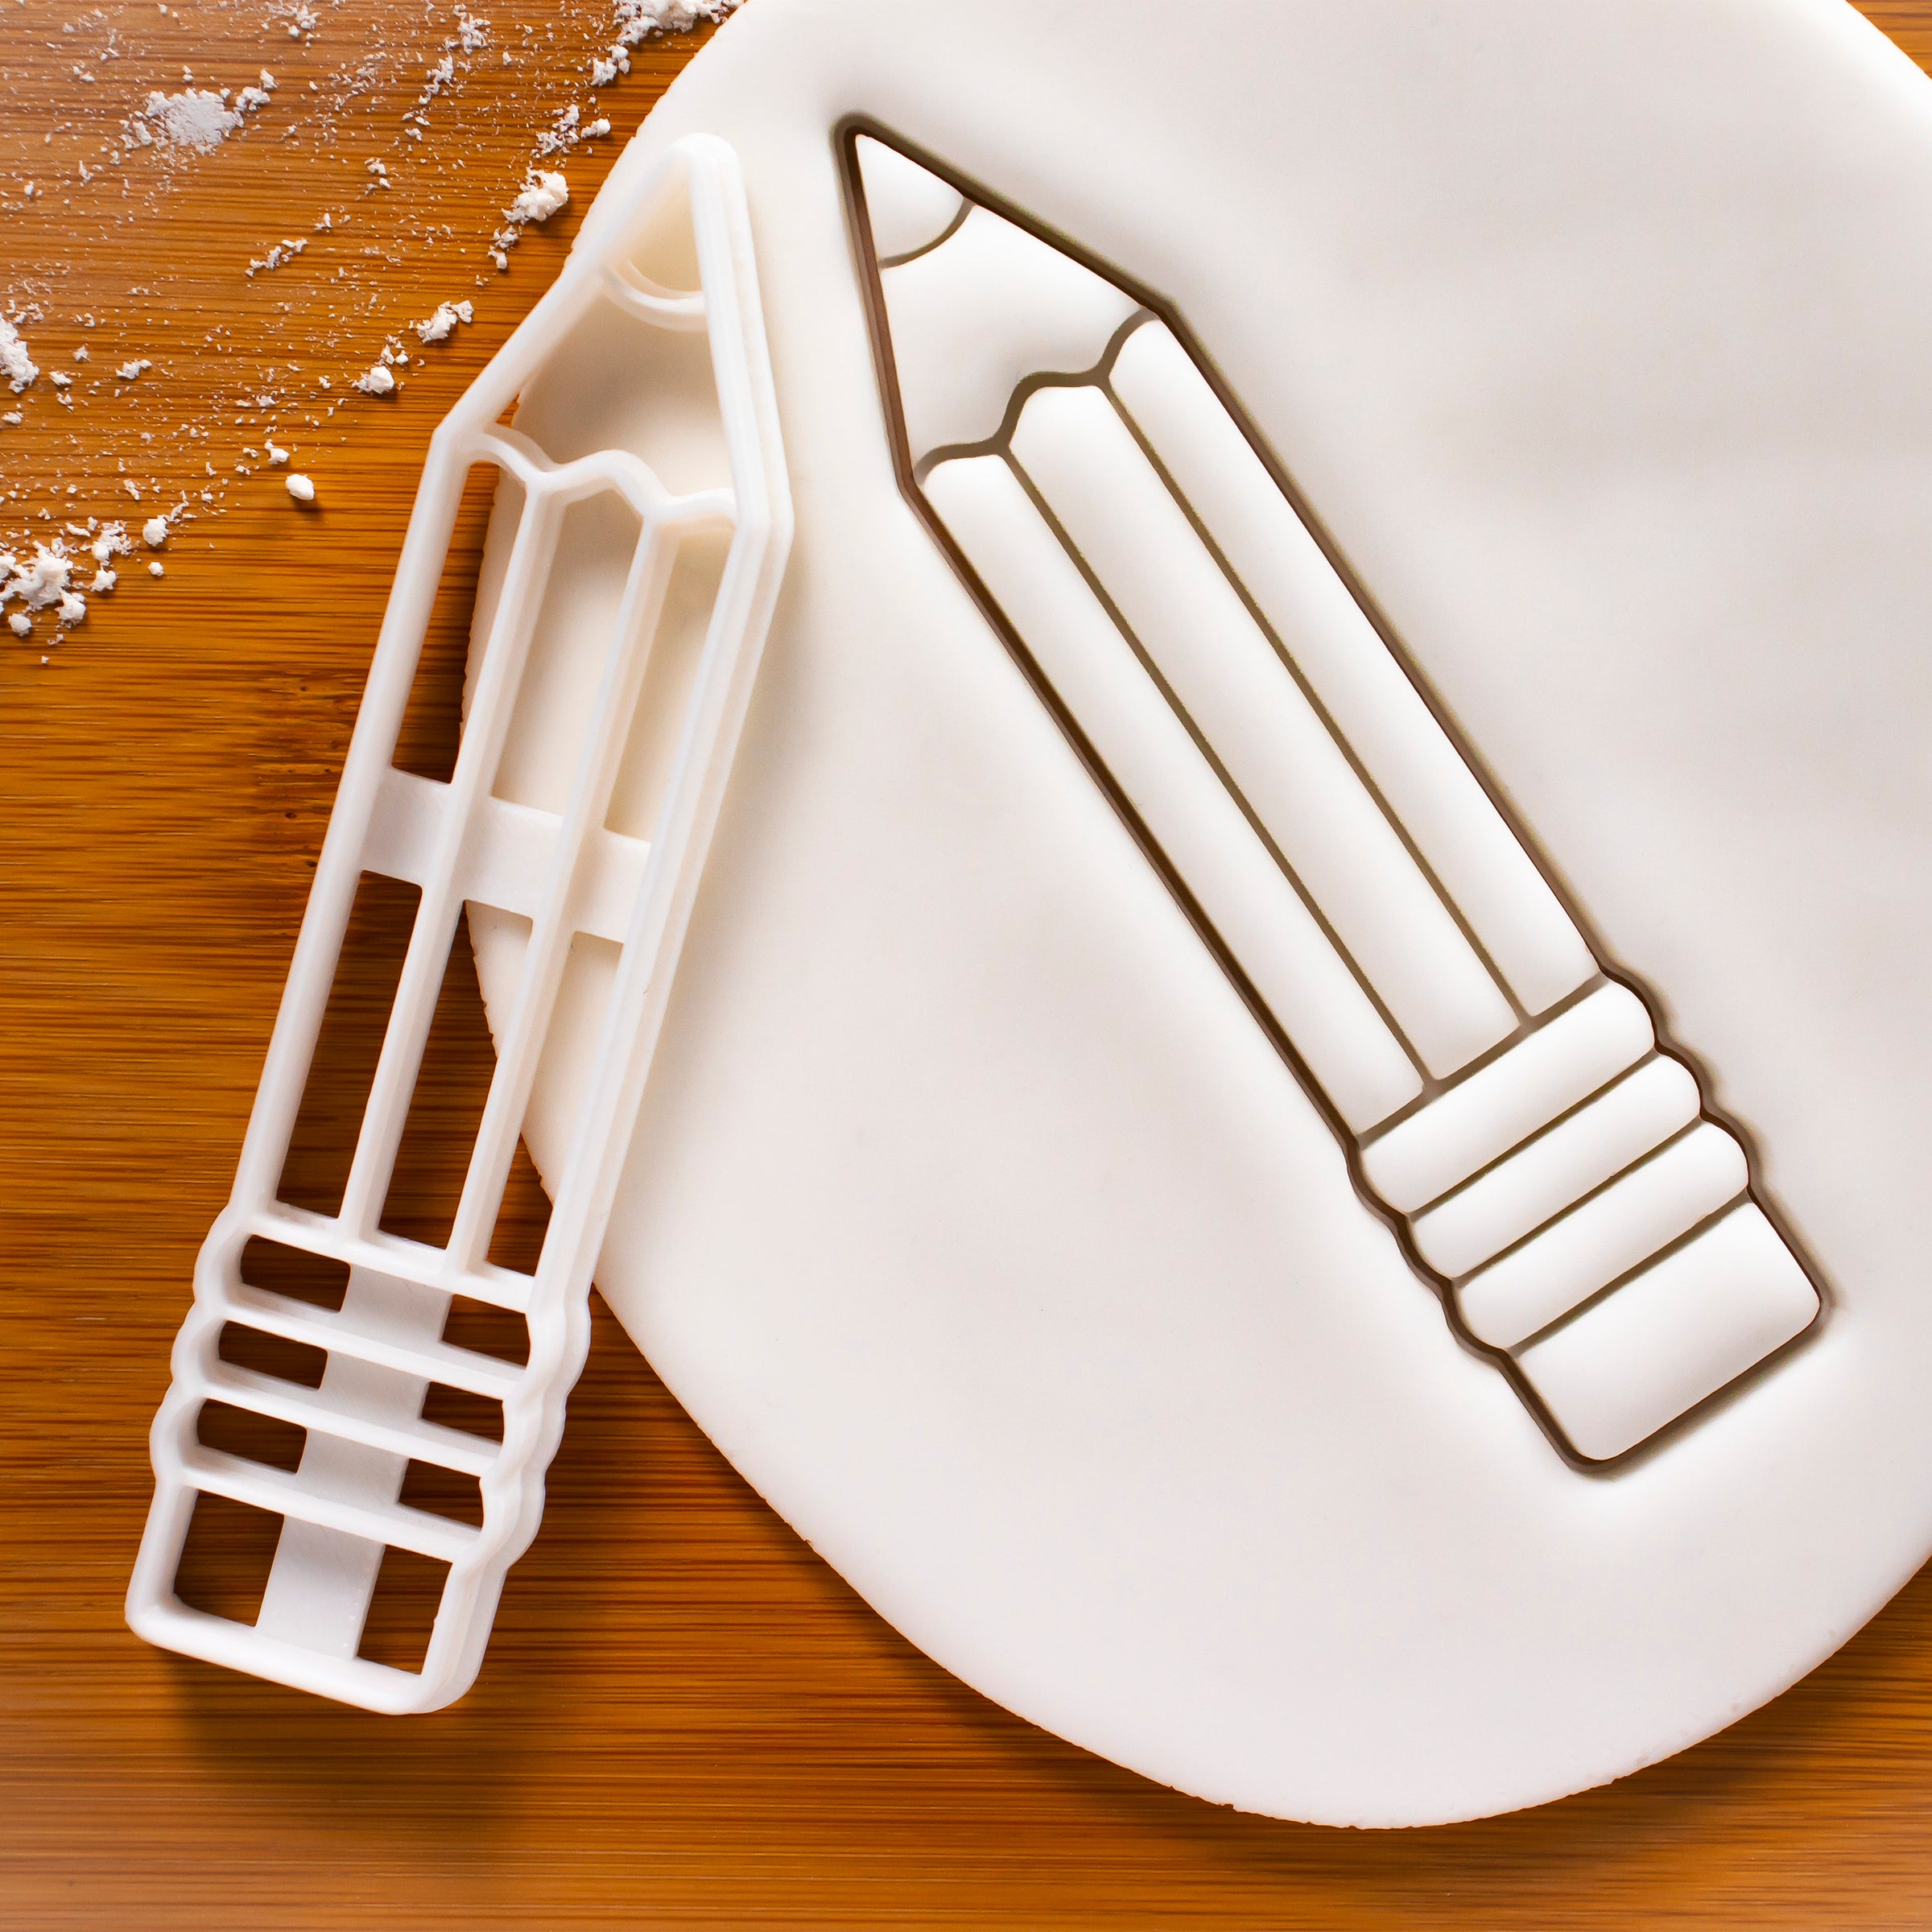 Back to School Pencil Cookie Cutter